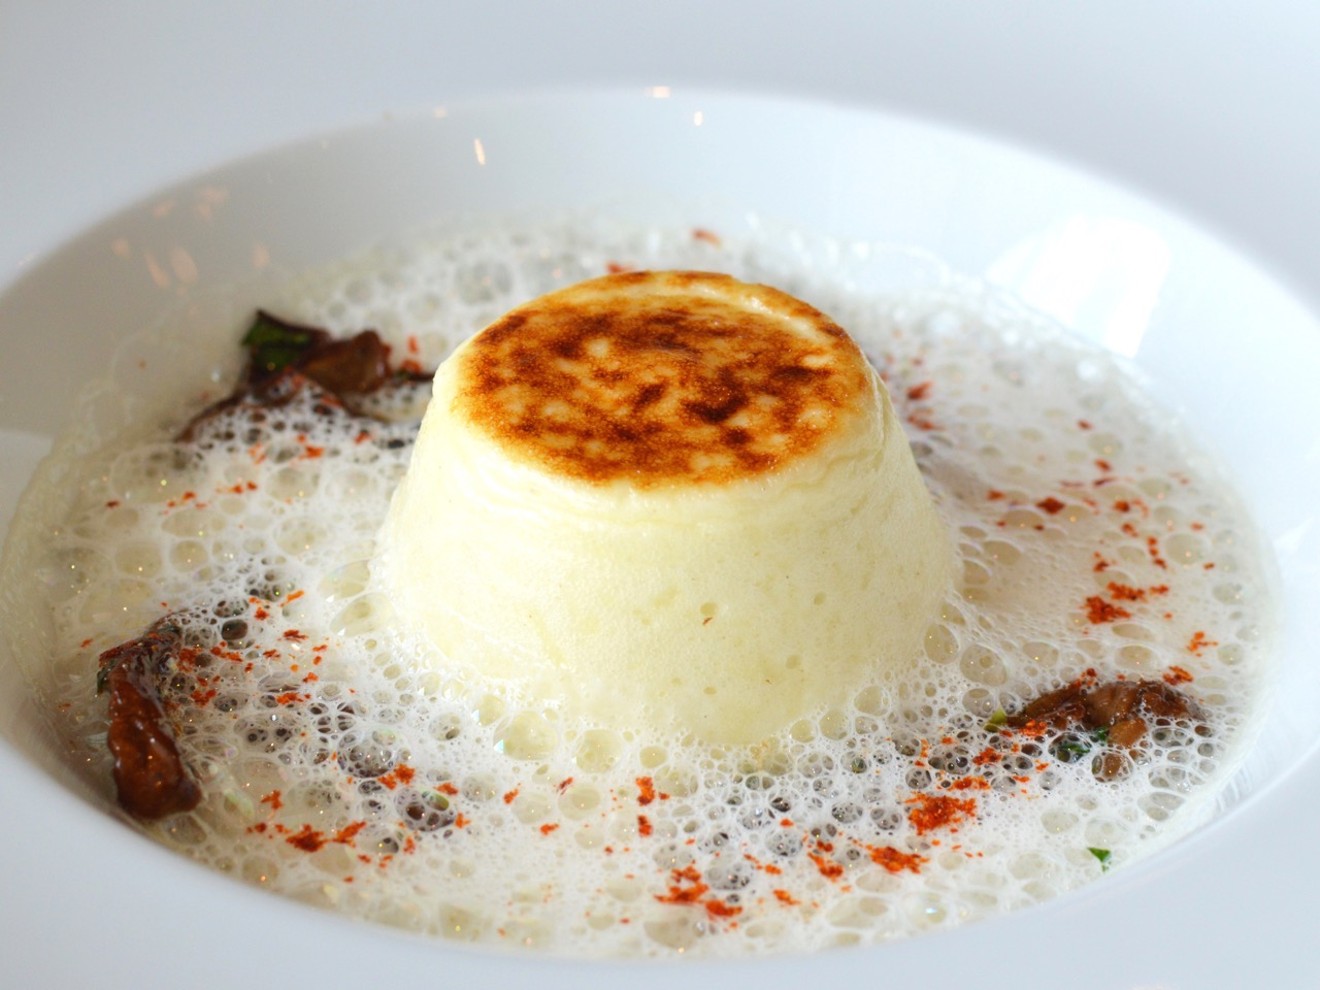 Caramelized cheese souffle with parmesan foam by Manuel Pucha at La Table.